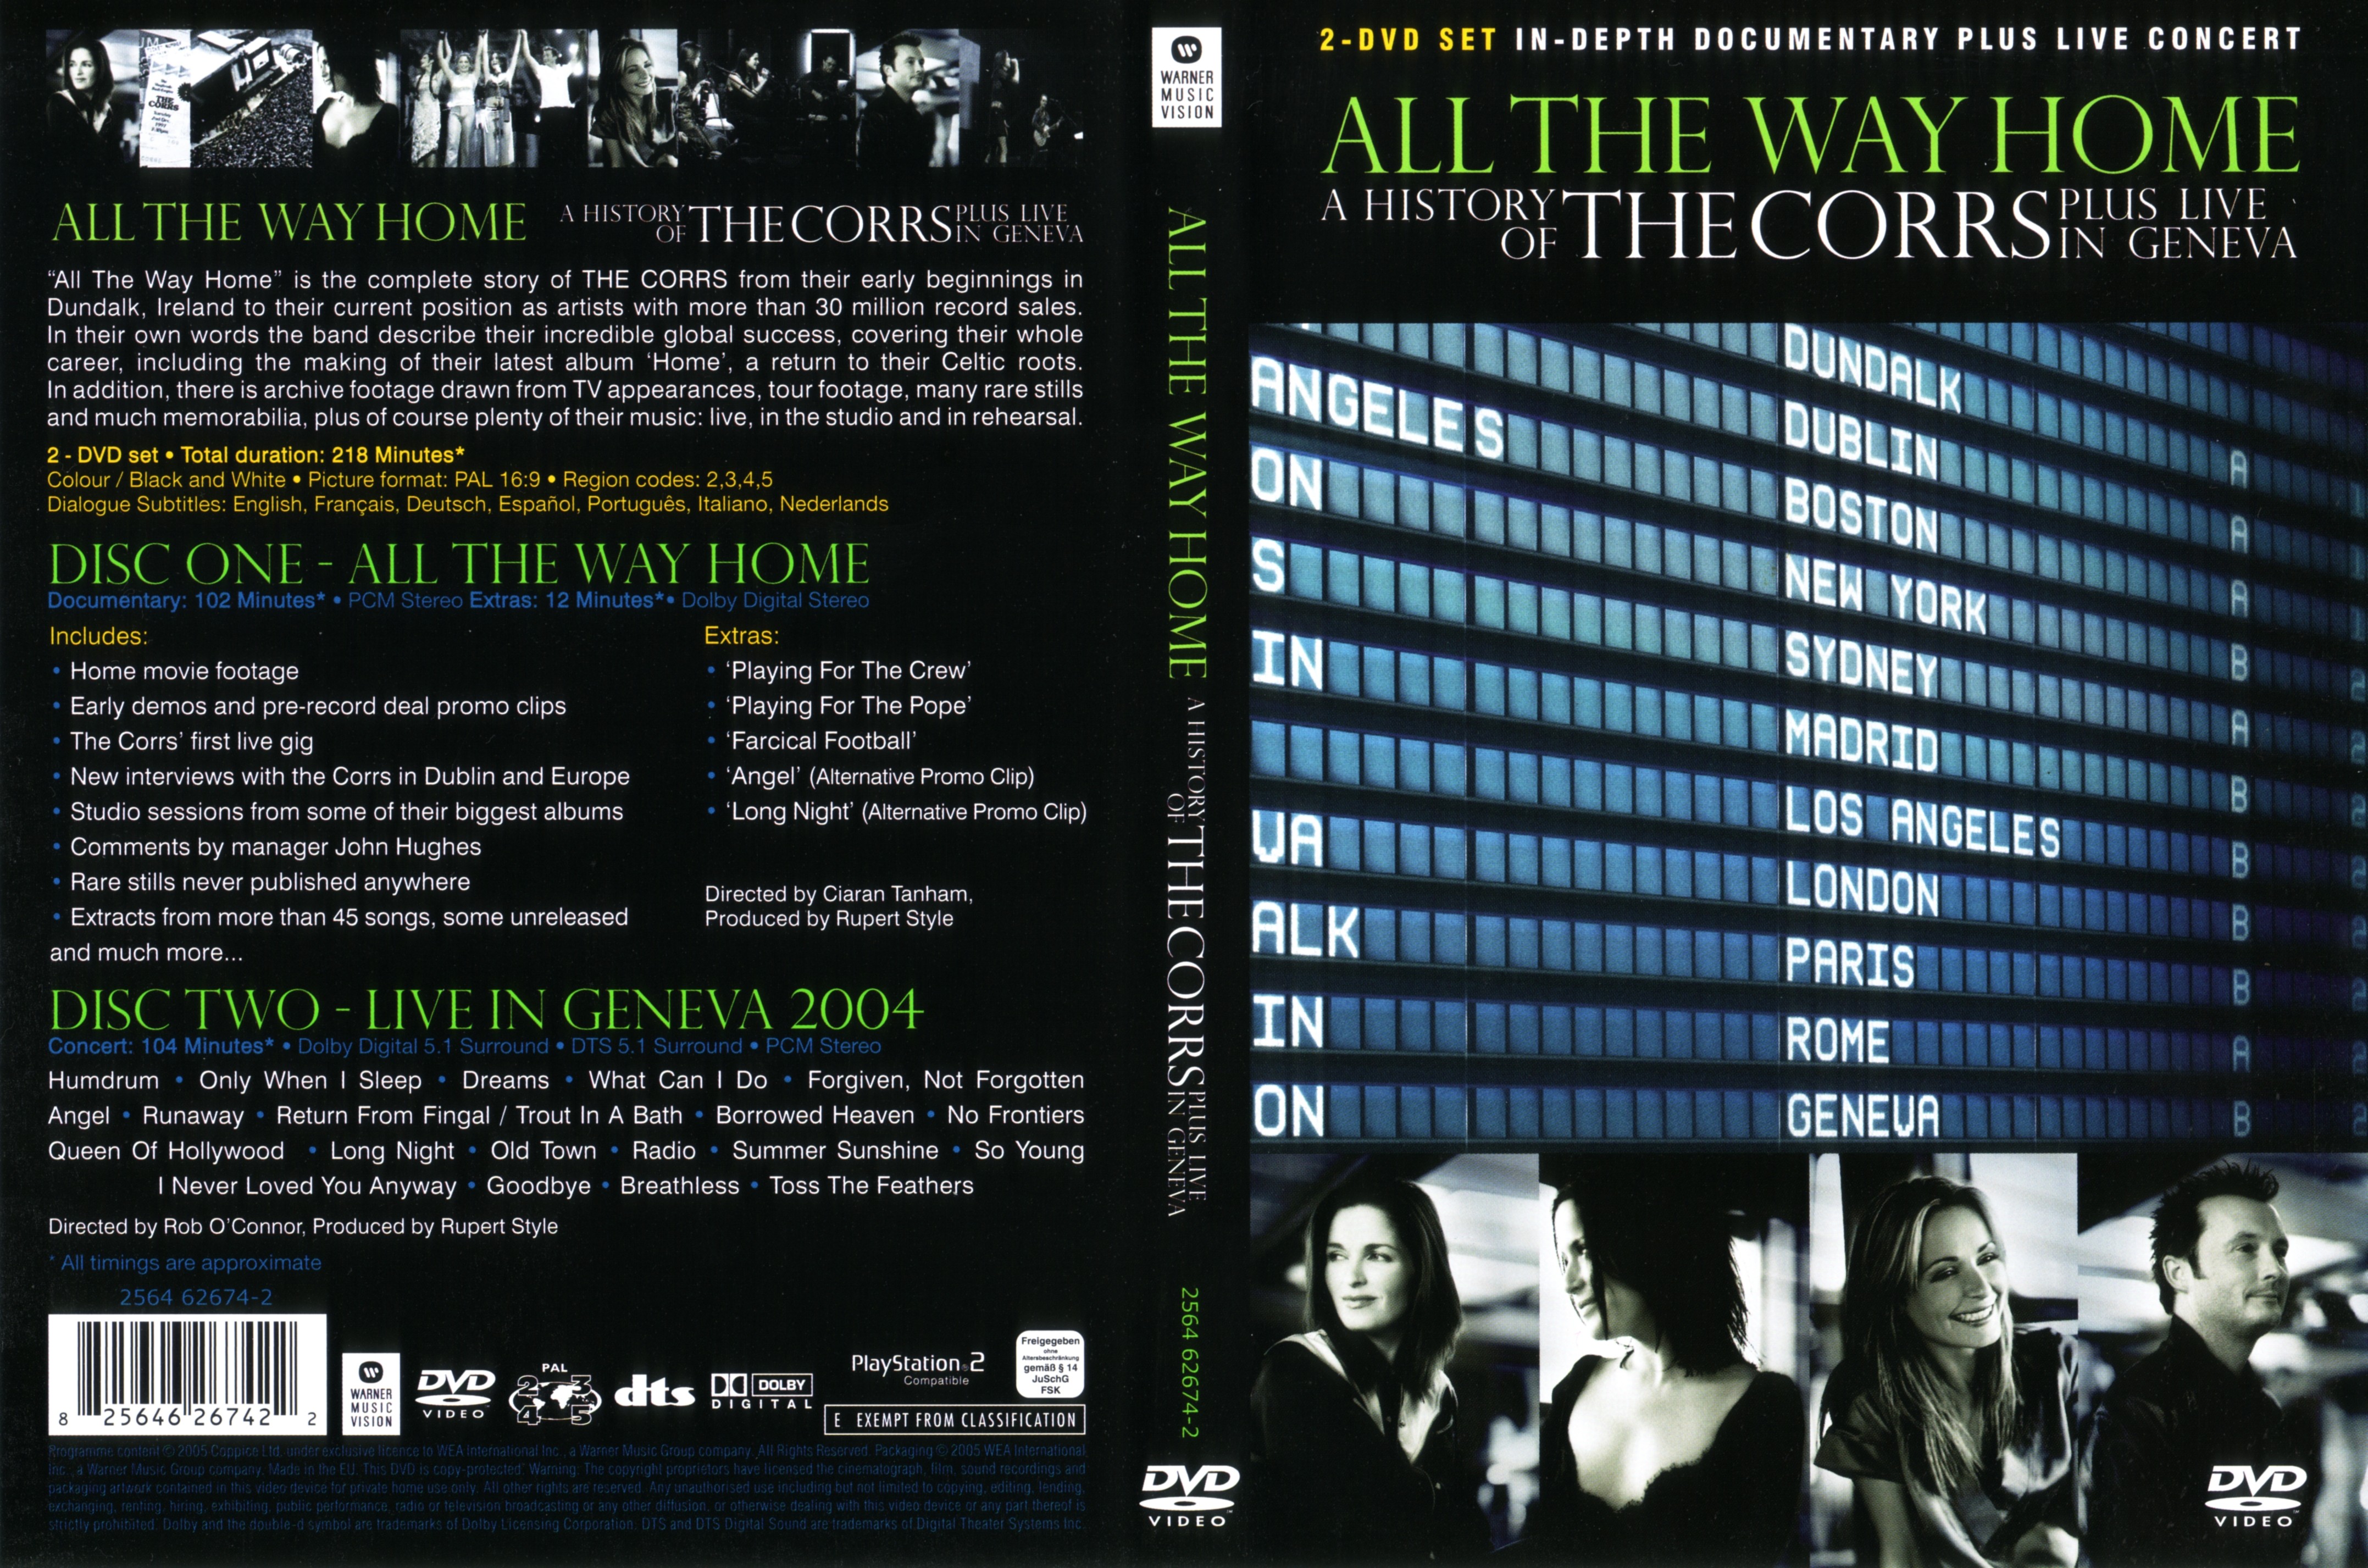 Jaquette DVD The corrs - All the way home